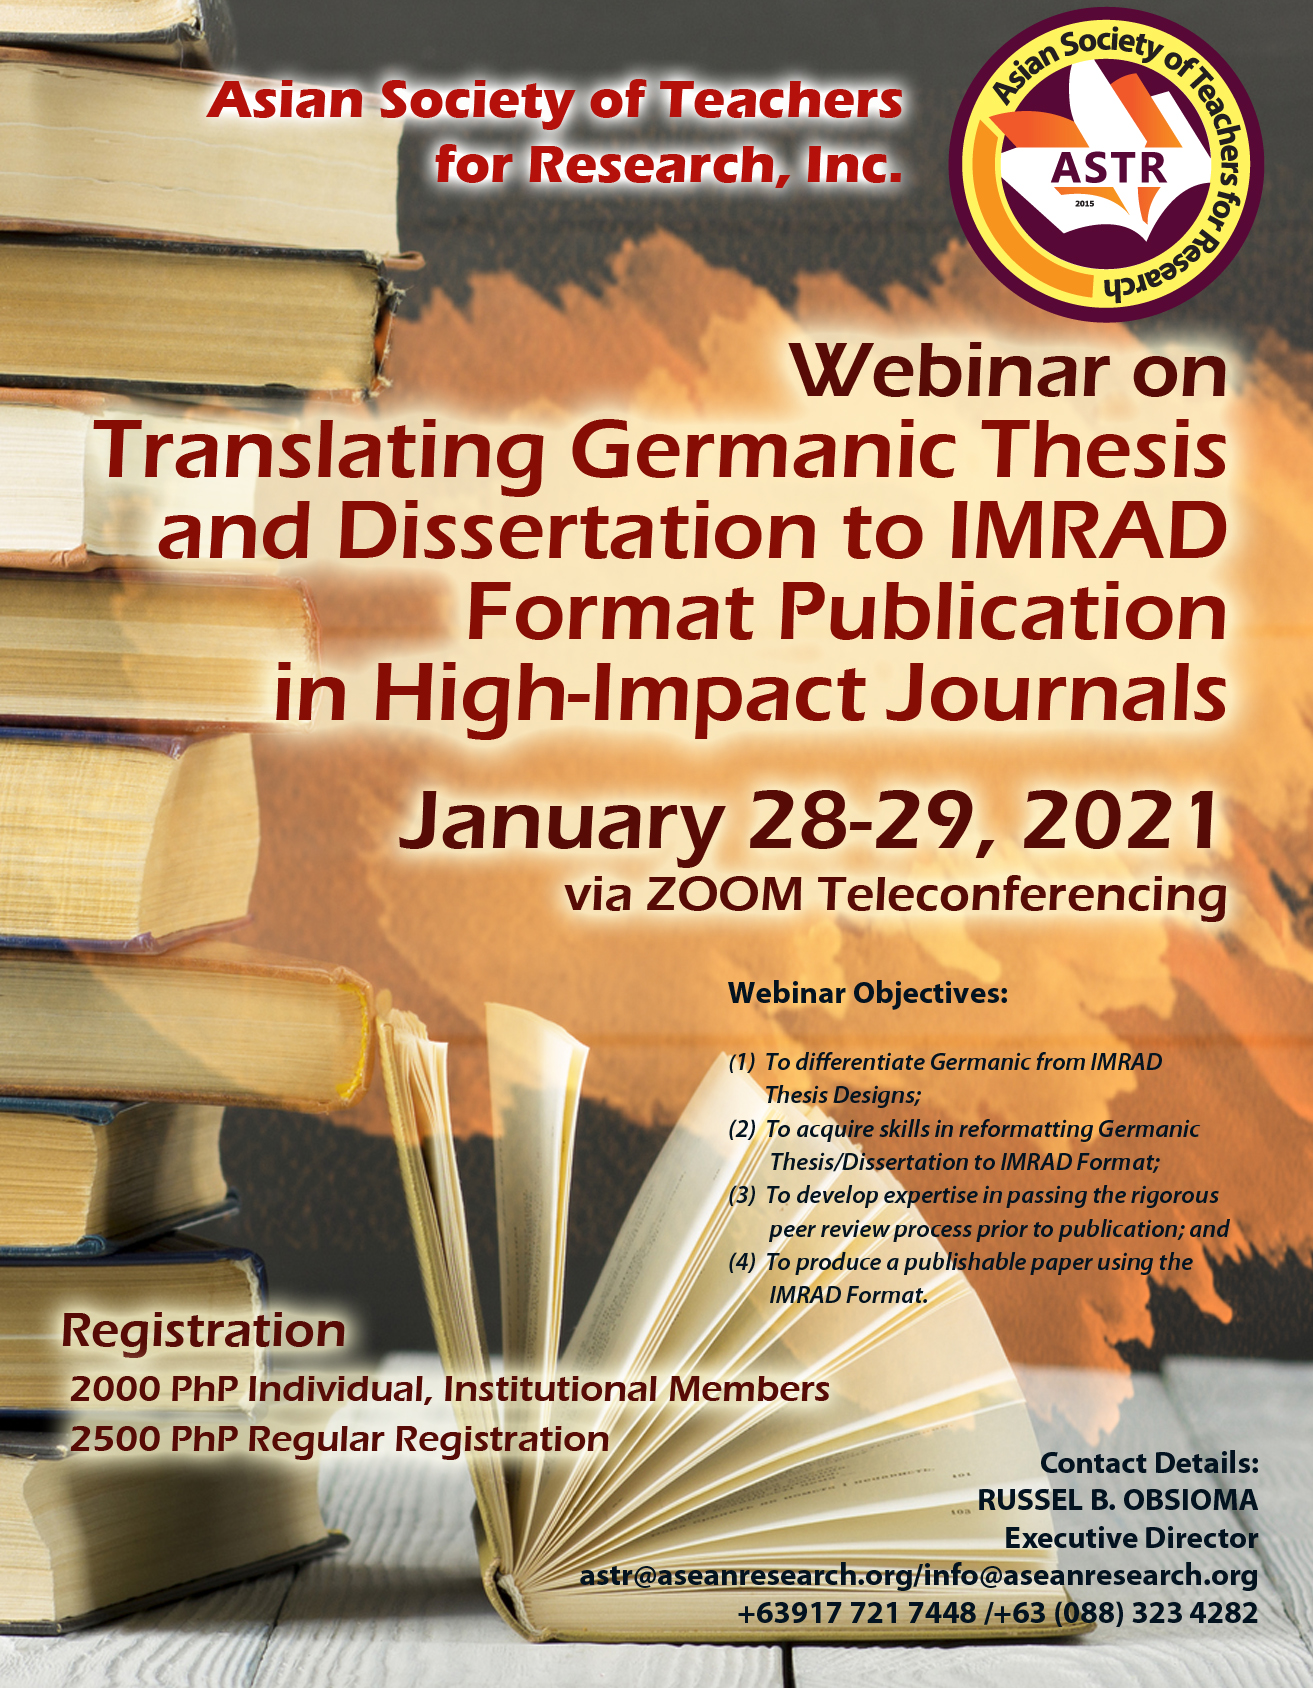 Asean Research Organization Webinar On Translating Germanic Thesis And Dissertation To Imrad Format Publication In High Impact Journals